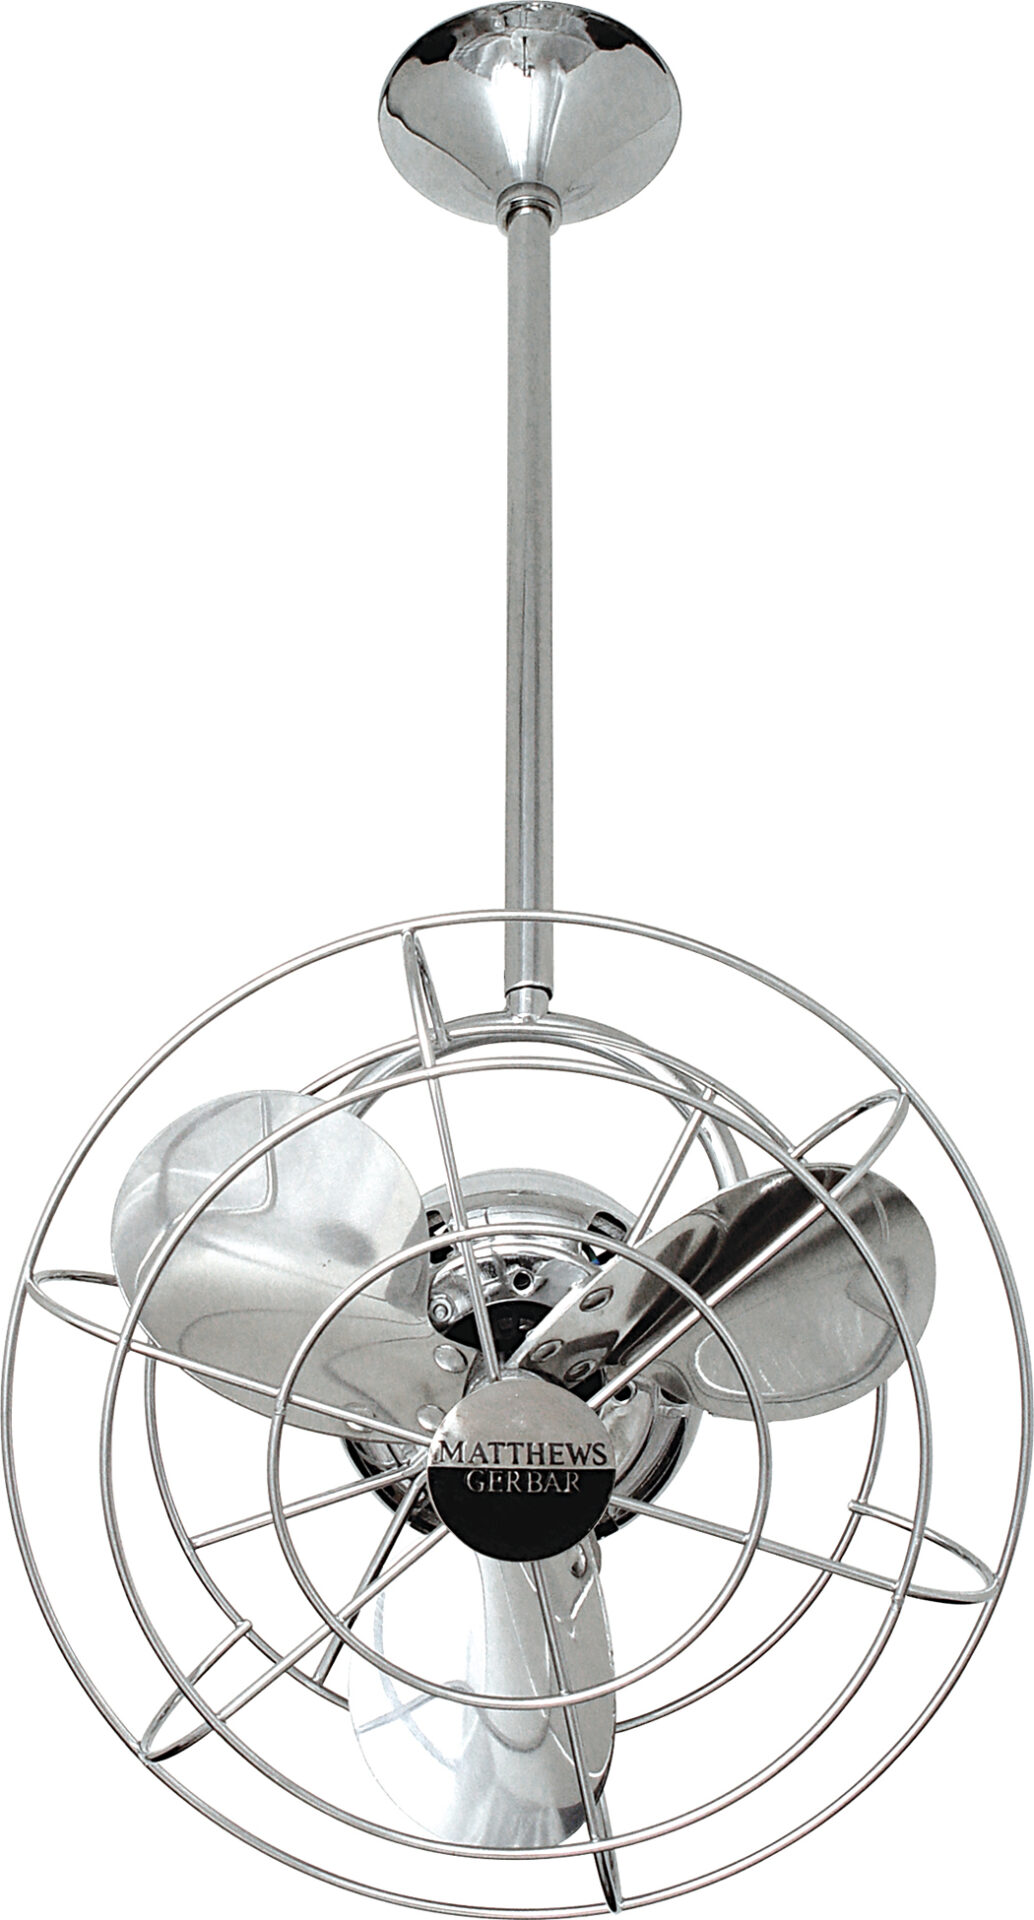 Bianca Direcional ceiling fan in Polished Chrome with metal blades and decorative cage made by Matthews Fan Company.